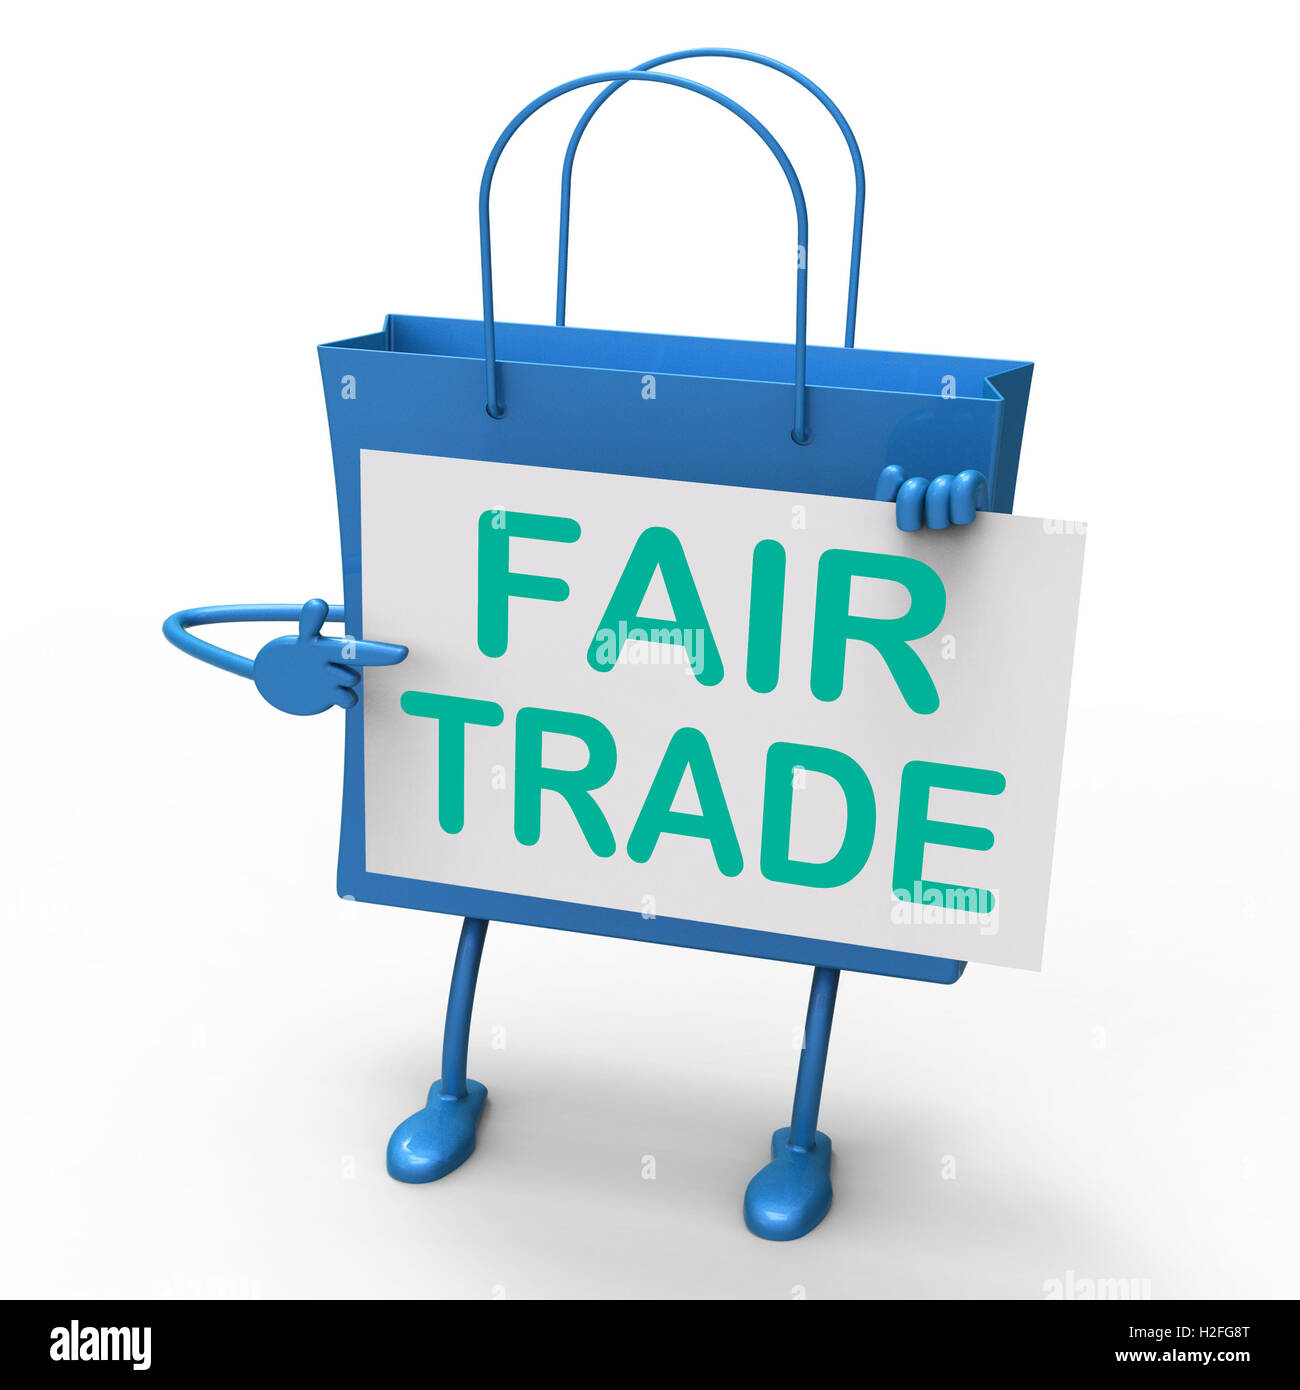 Fair Trade Bag Represents Equal Deals and Exchange Stock Photo